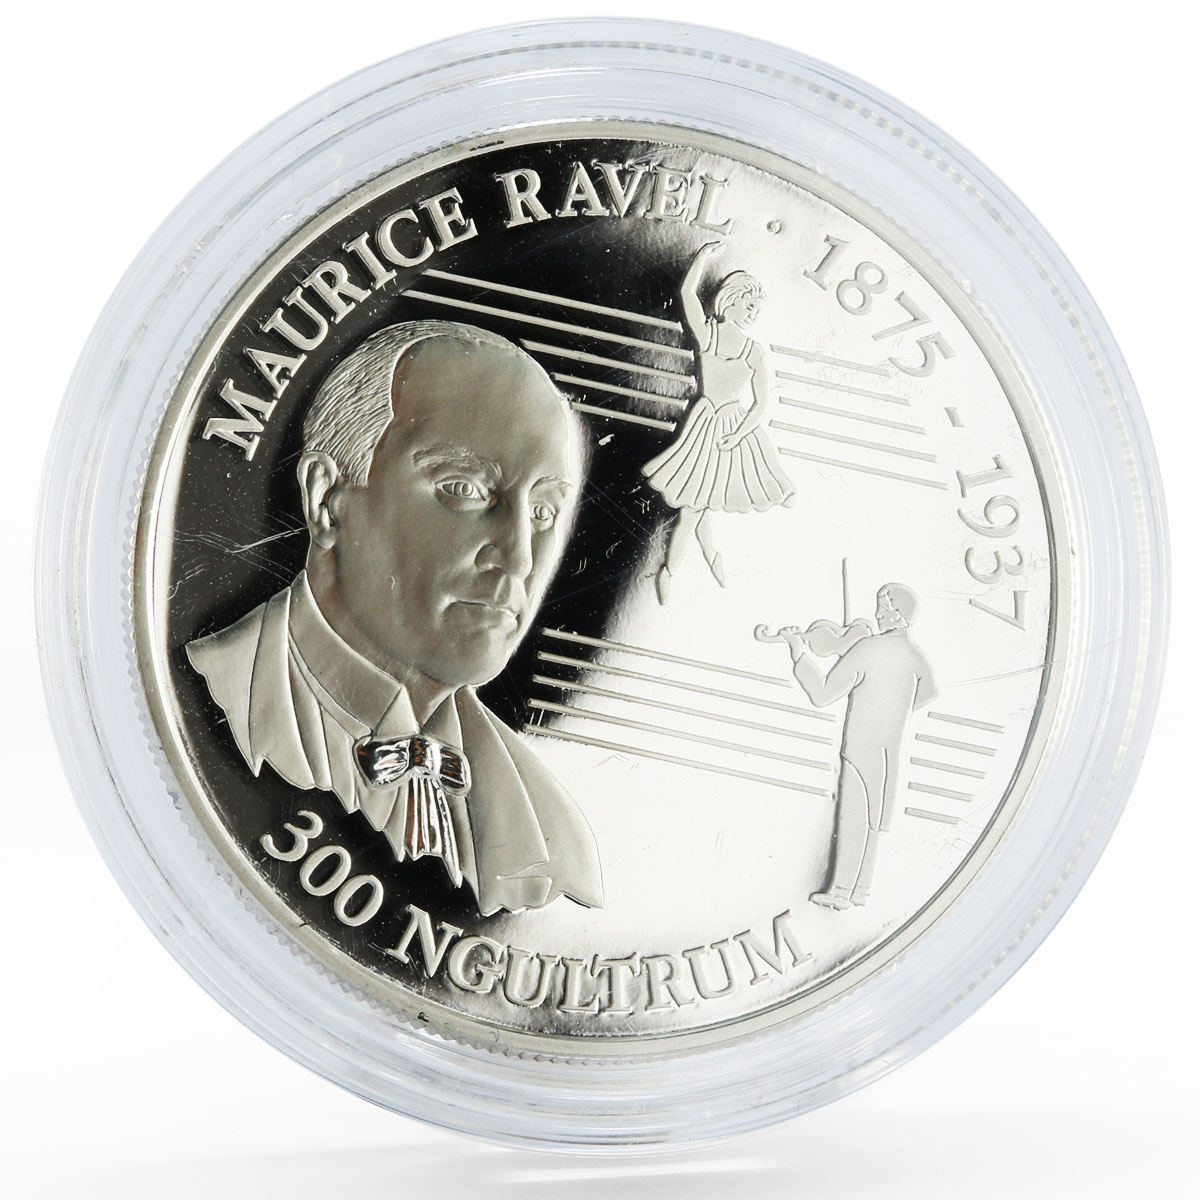 Bhutan 300 ngultrums Composer Maurice Ravel Playing the Violin silver coin 1993